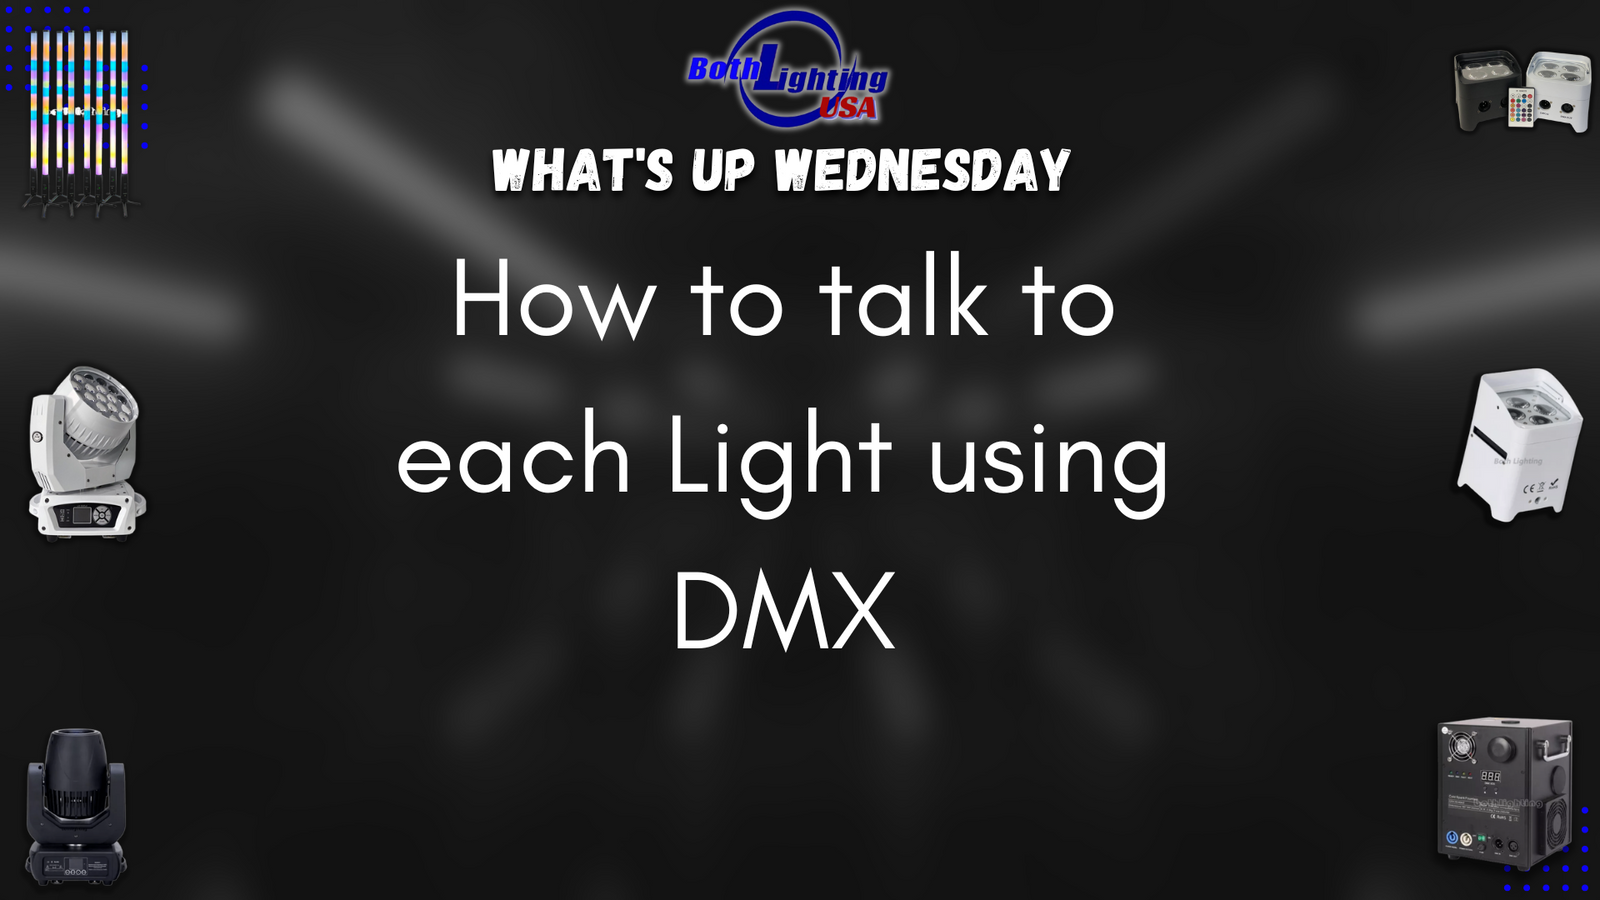 How to Talk to Each Light using DMX